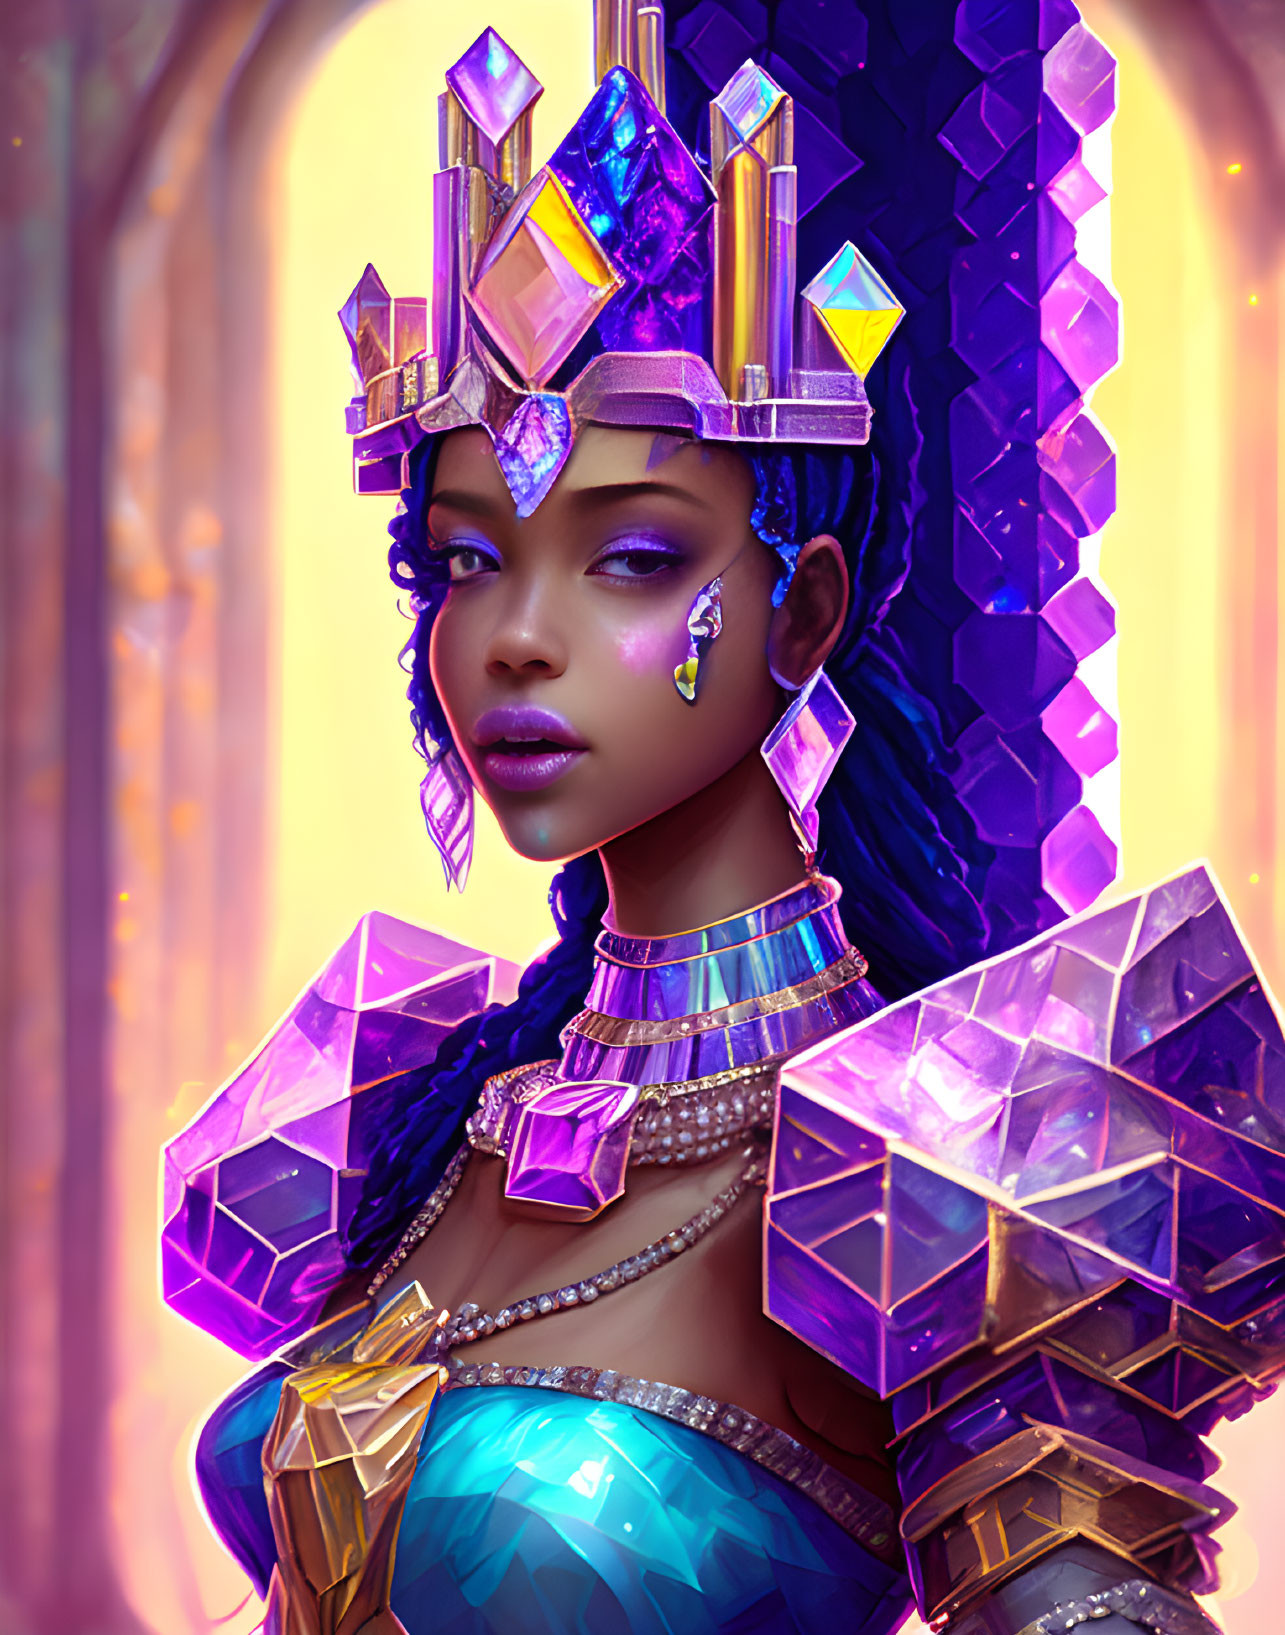 Crystal-themed digital artwork of a woman with purple and blue adornments